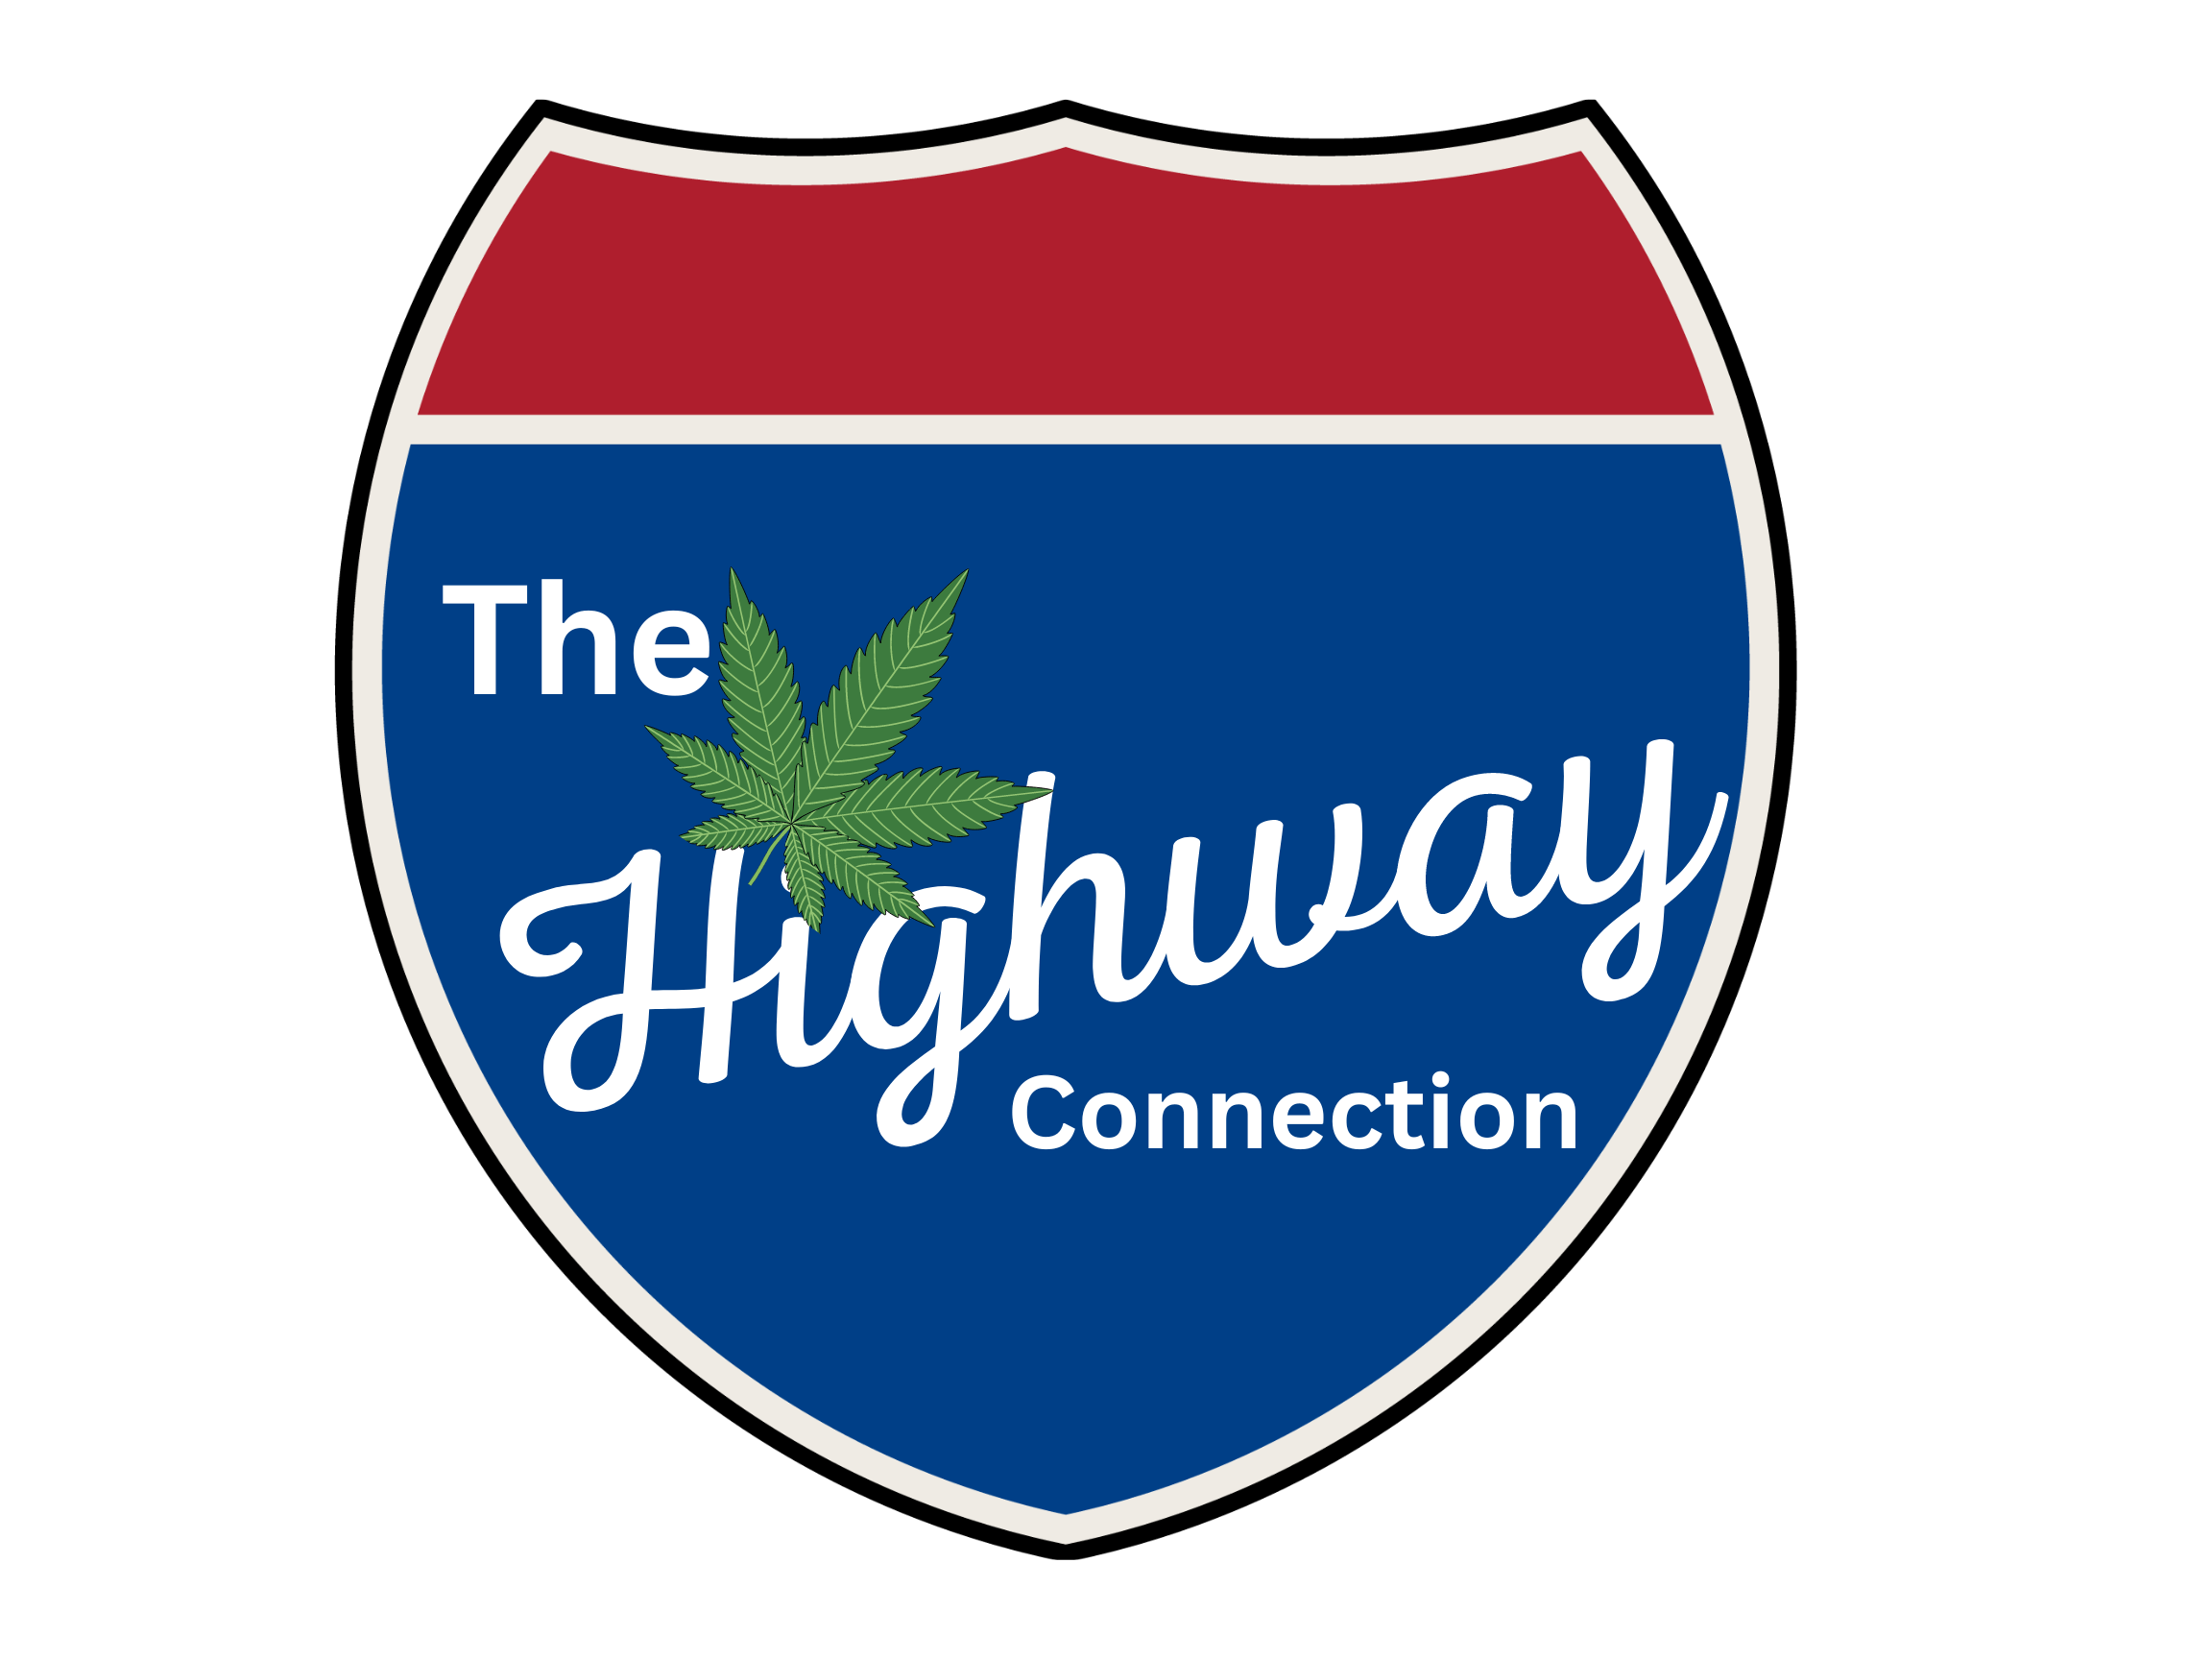 The Highway Connection logo